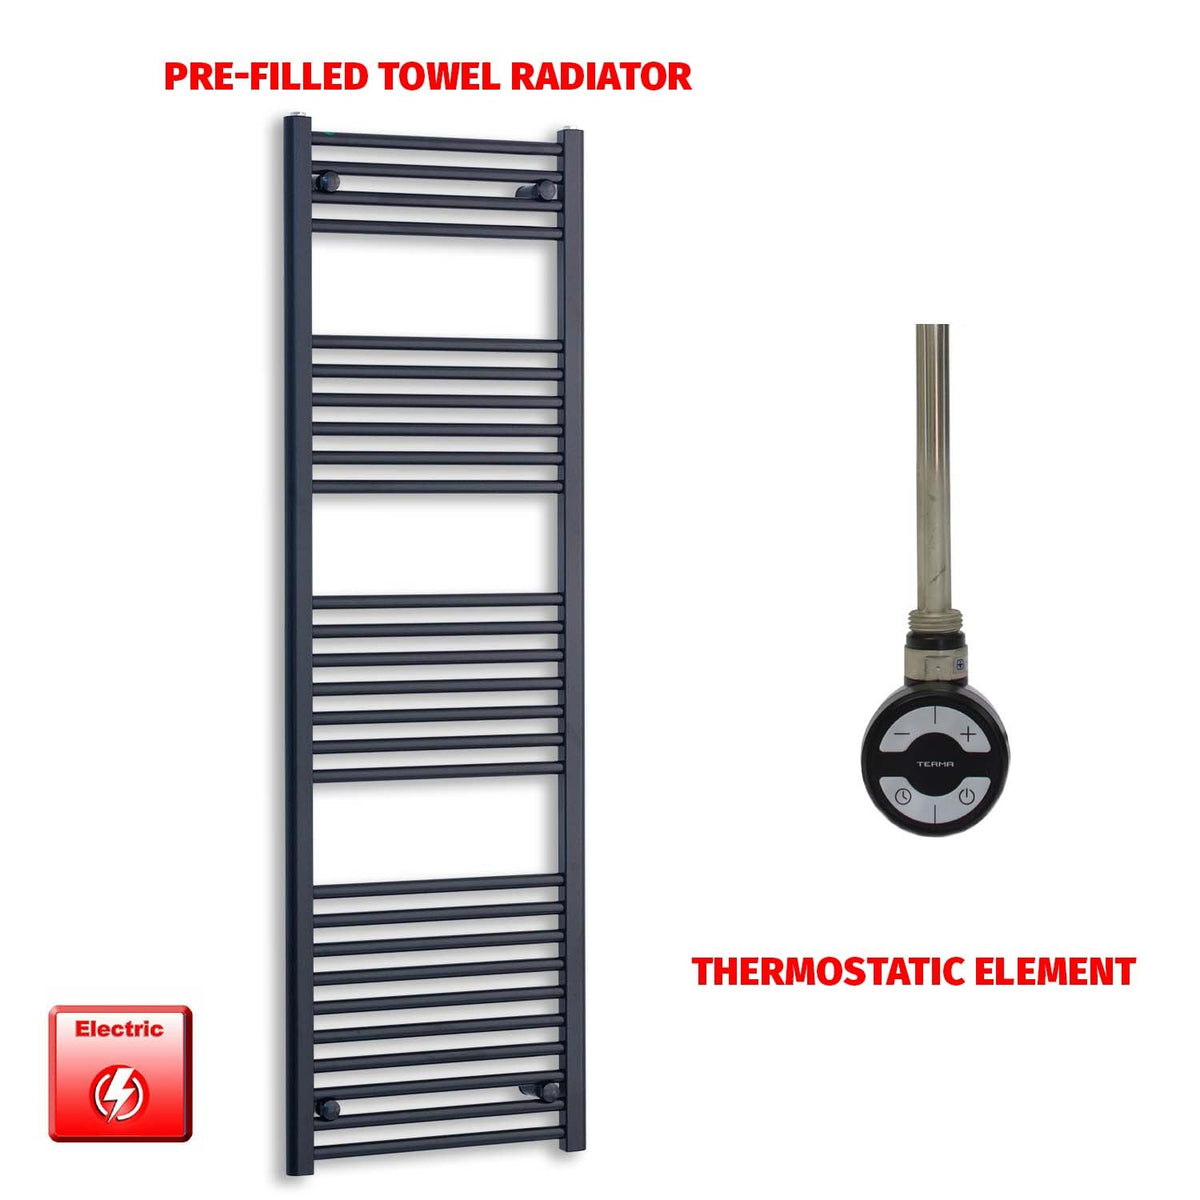 1600mm High 600mm Wide Flat Black Pre-Filled Electric Heated Towel Radiator HTR MOA Thermostatic No Timer